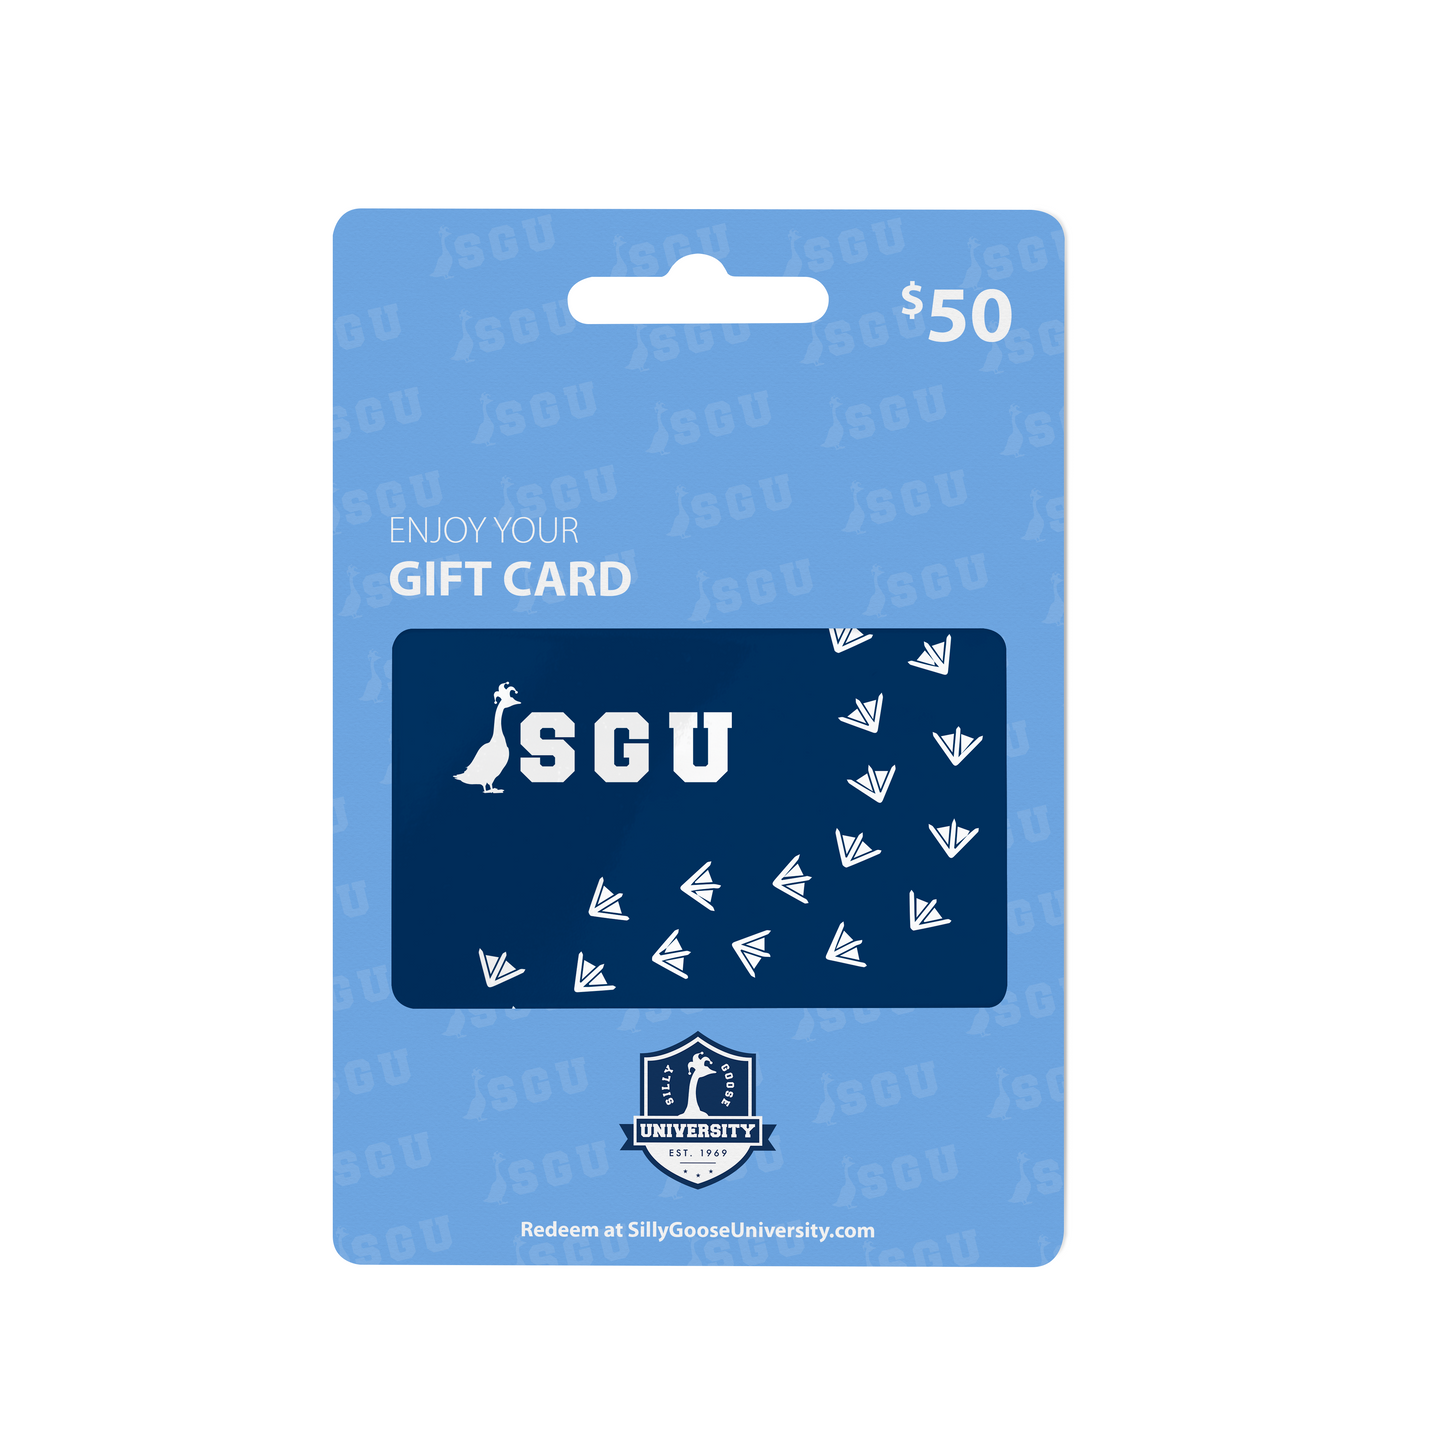 Silly Goose University Gift Card